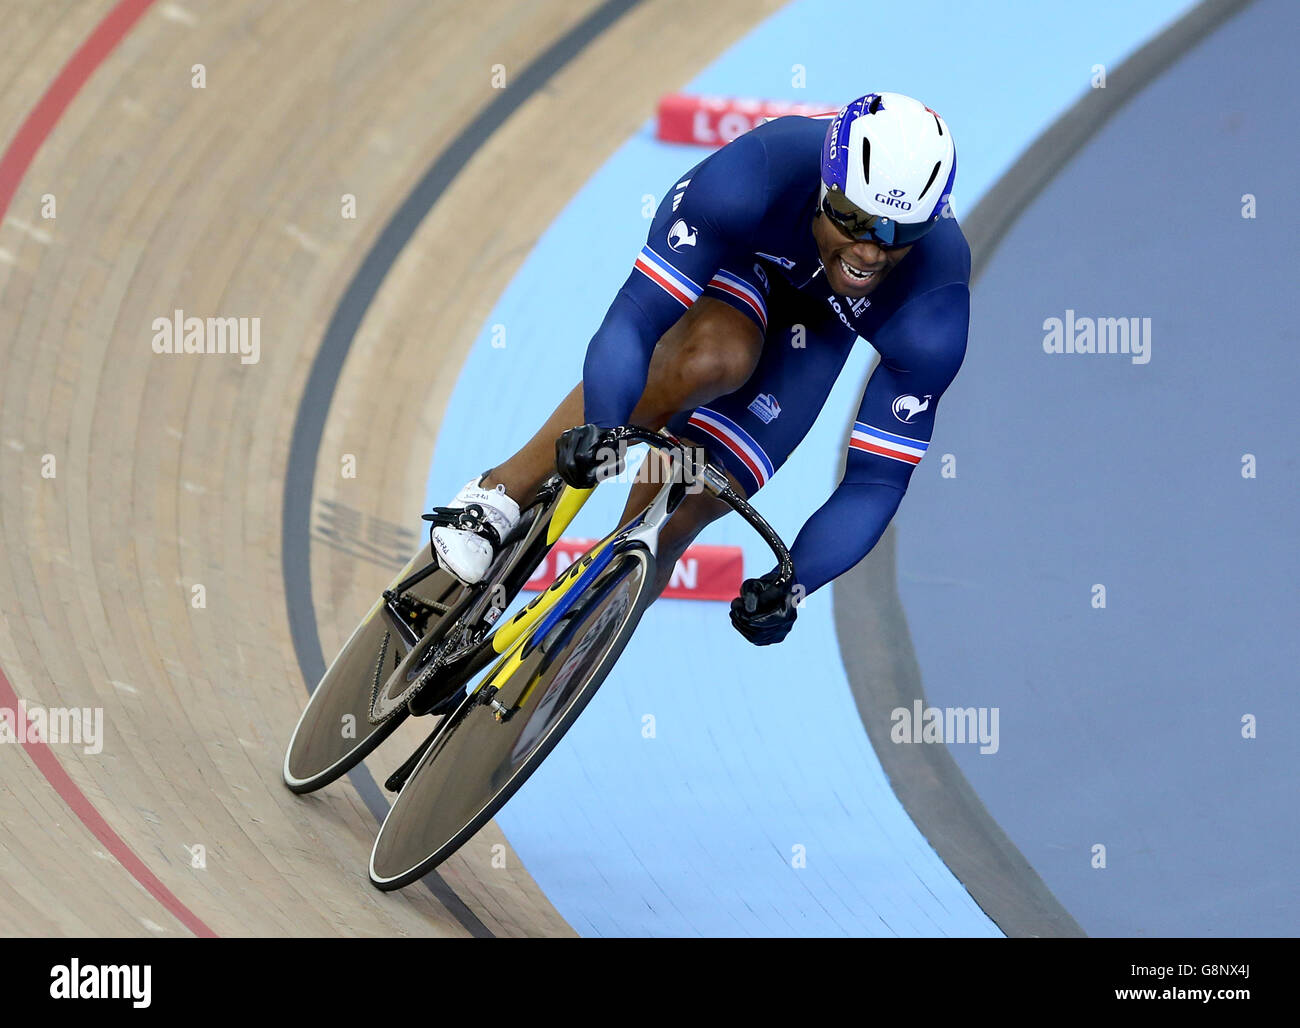 France's Gregory Bauge competes in the Men's Sprint during day three of the UCI Track Cycling World Championships at Lee Valley VeloPark, London. PRESS ASSOCIATION Photo. Picture date: Friday March 4, 2016. See PA story CYCLING World. Photo credit should read: Tim Goode/PA Wire. Stock Photo